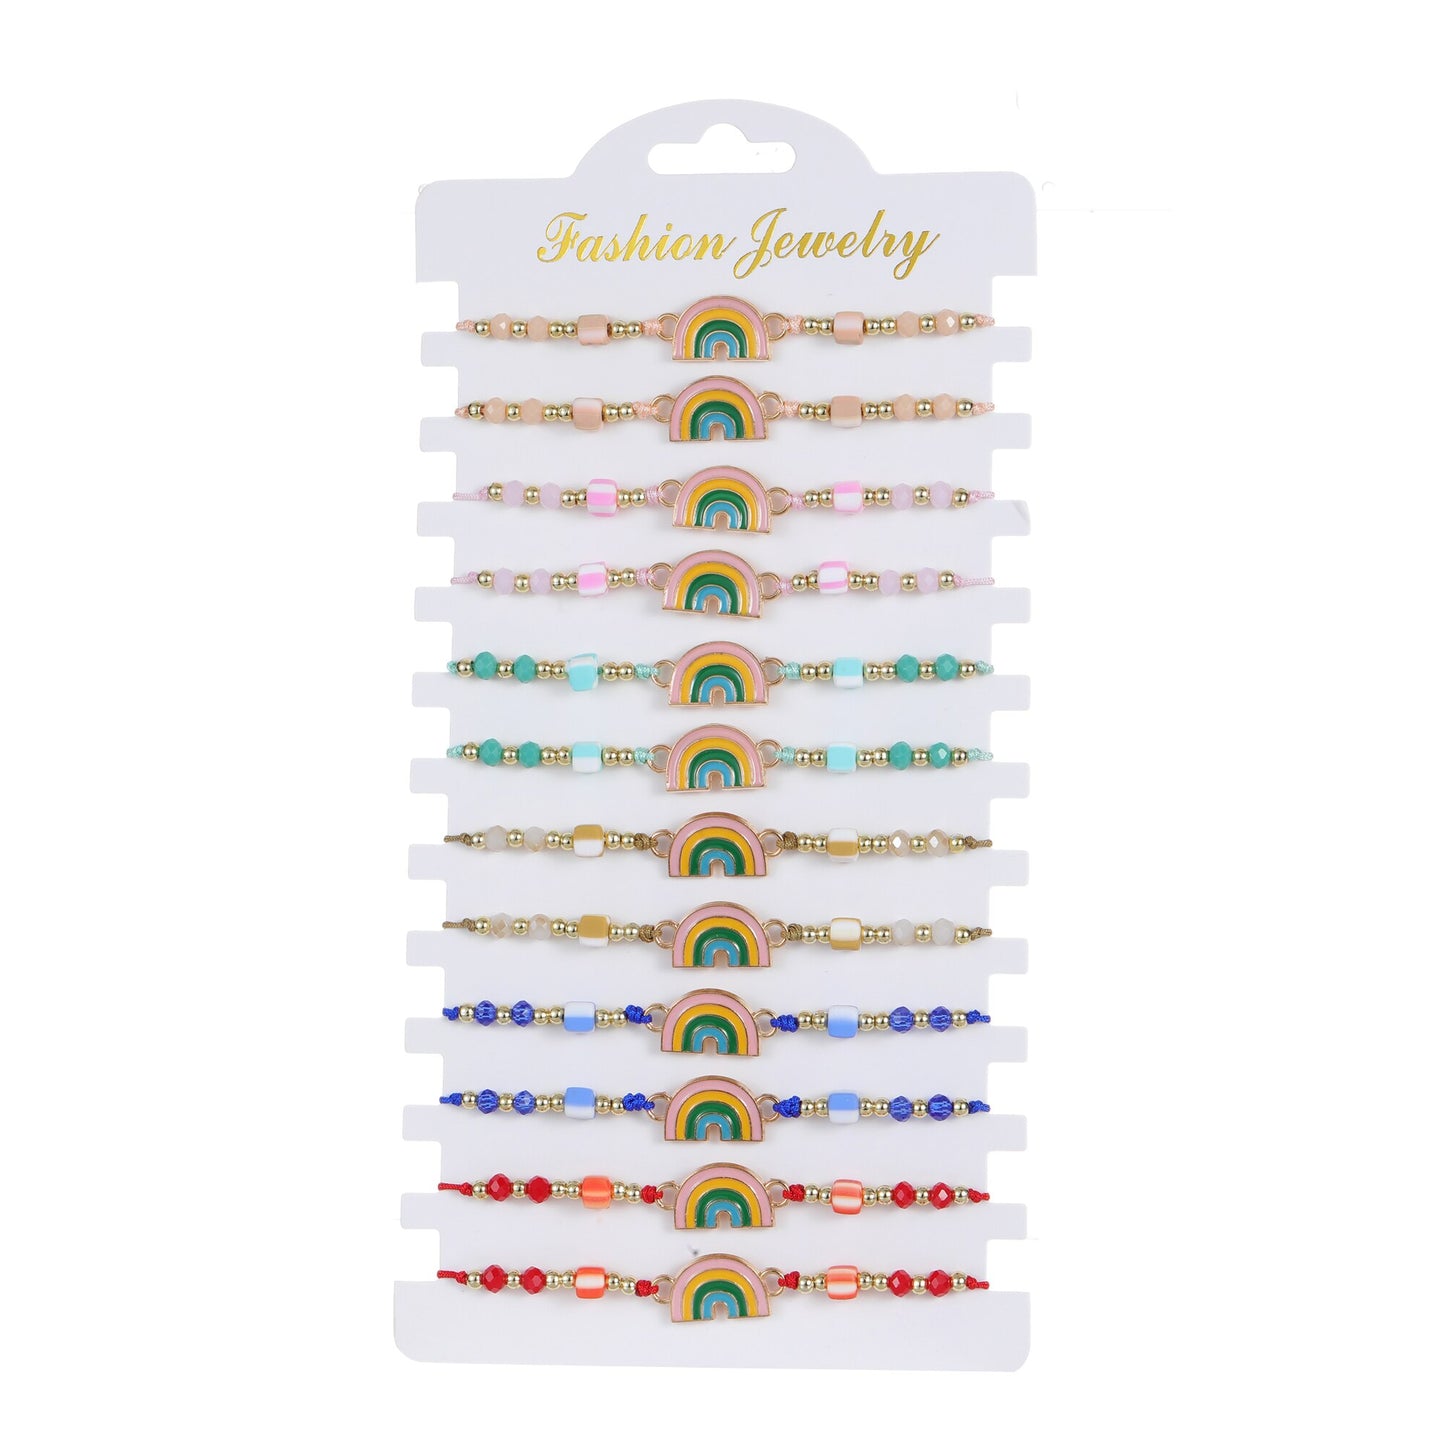 12pcs/lot Colorful Oil Drip Rainbow Pendant Braided Bracelet for Child Girl Adjustable Elastic Rope Chain  Anklet Party Jewelry